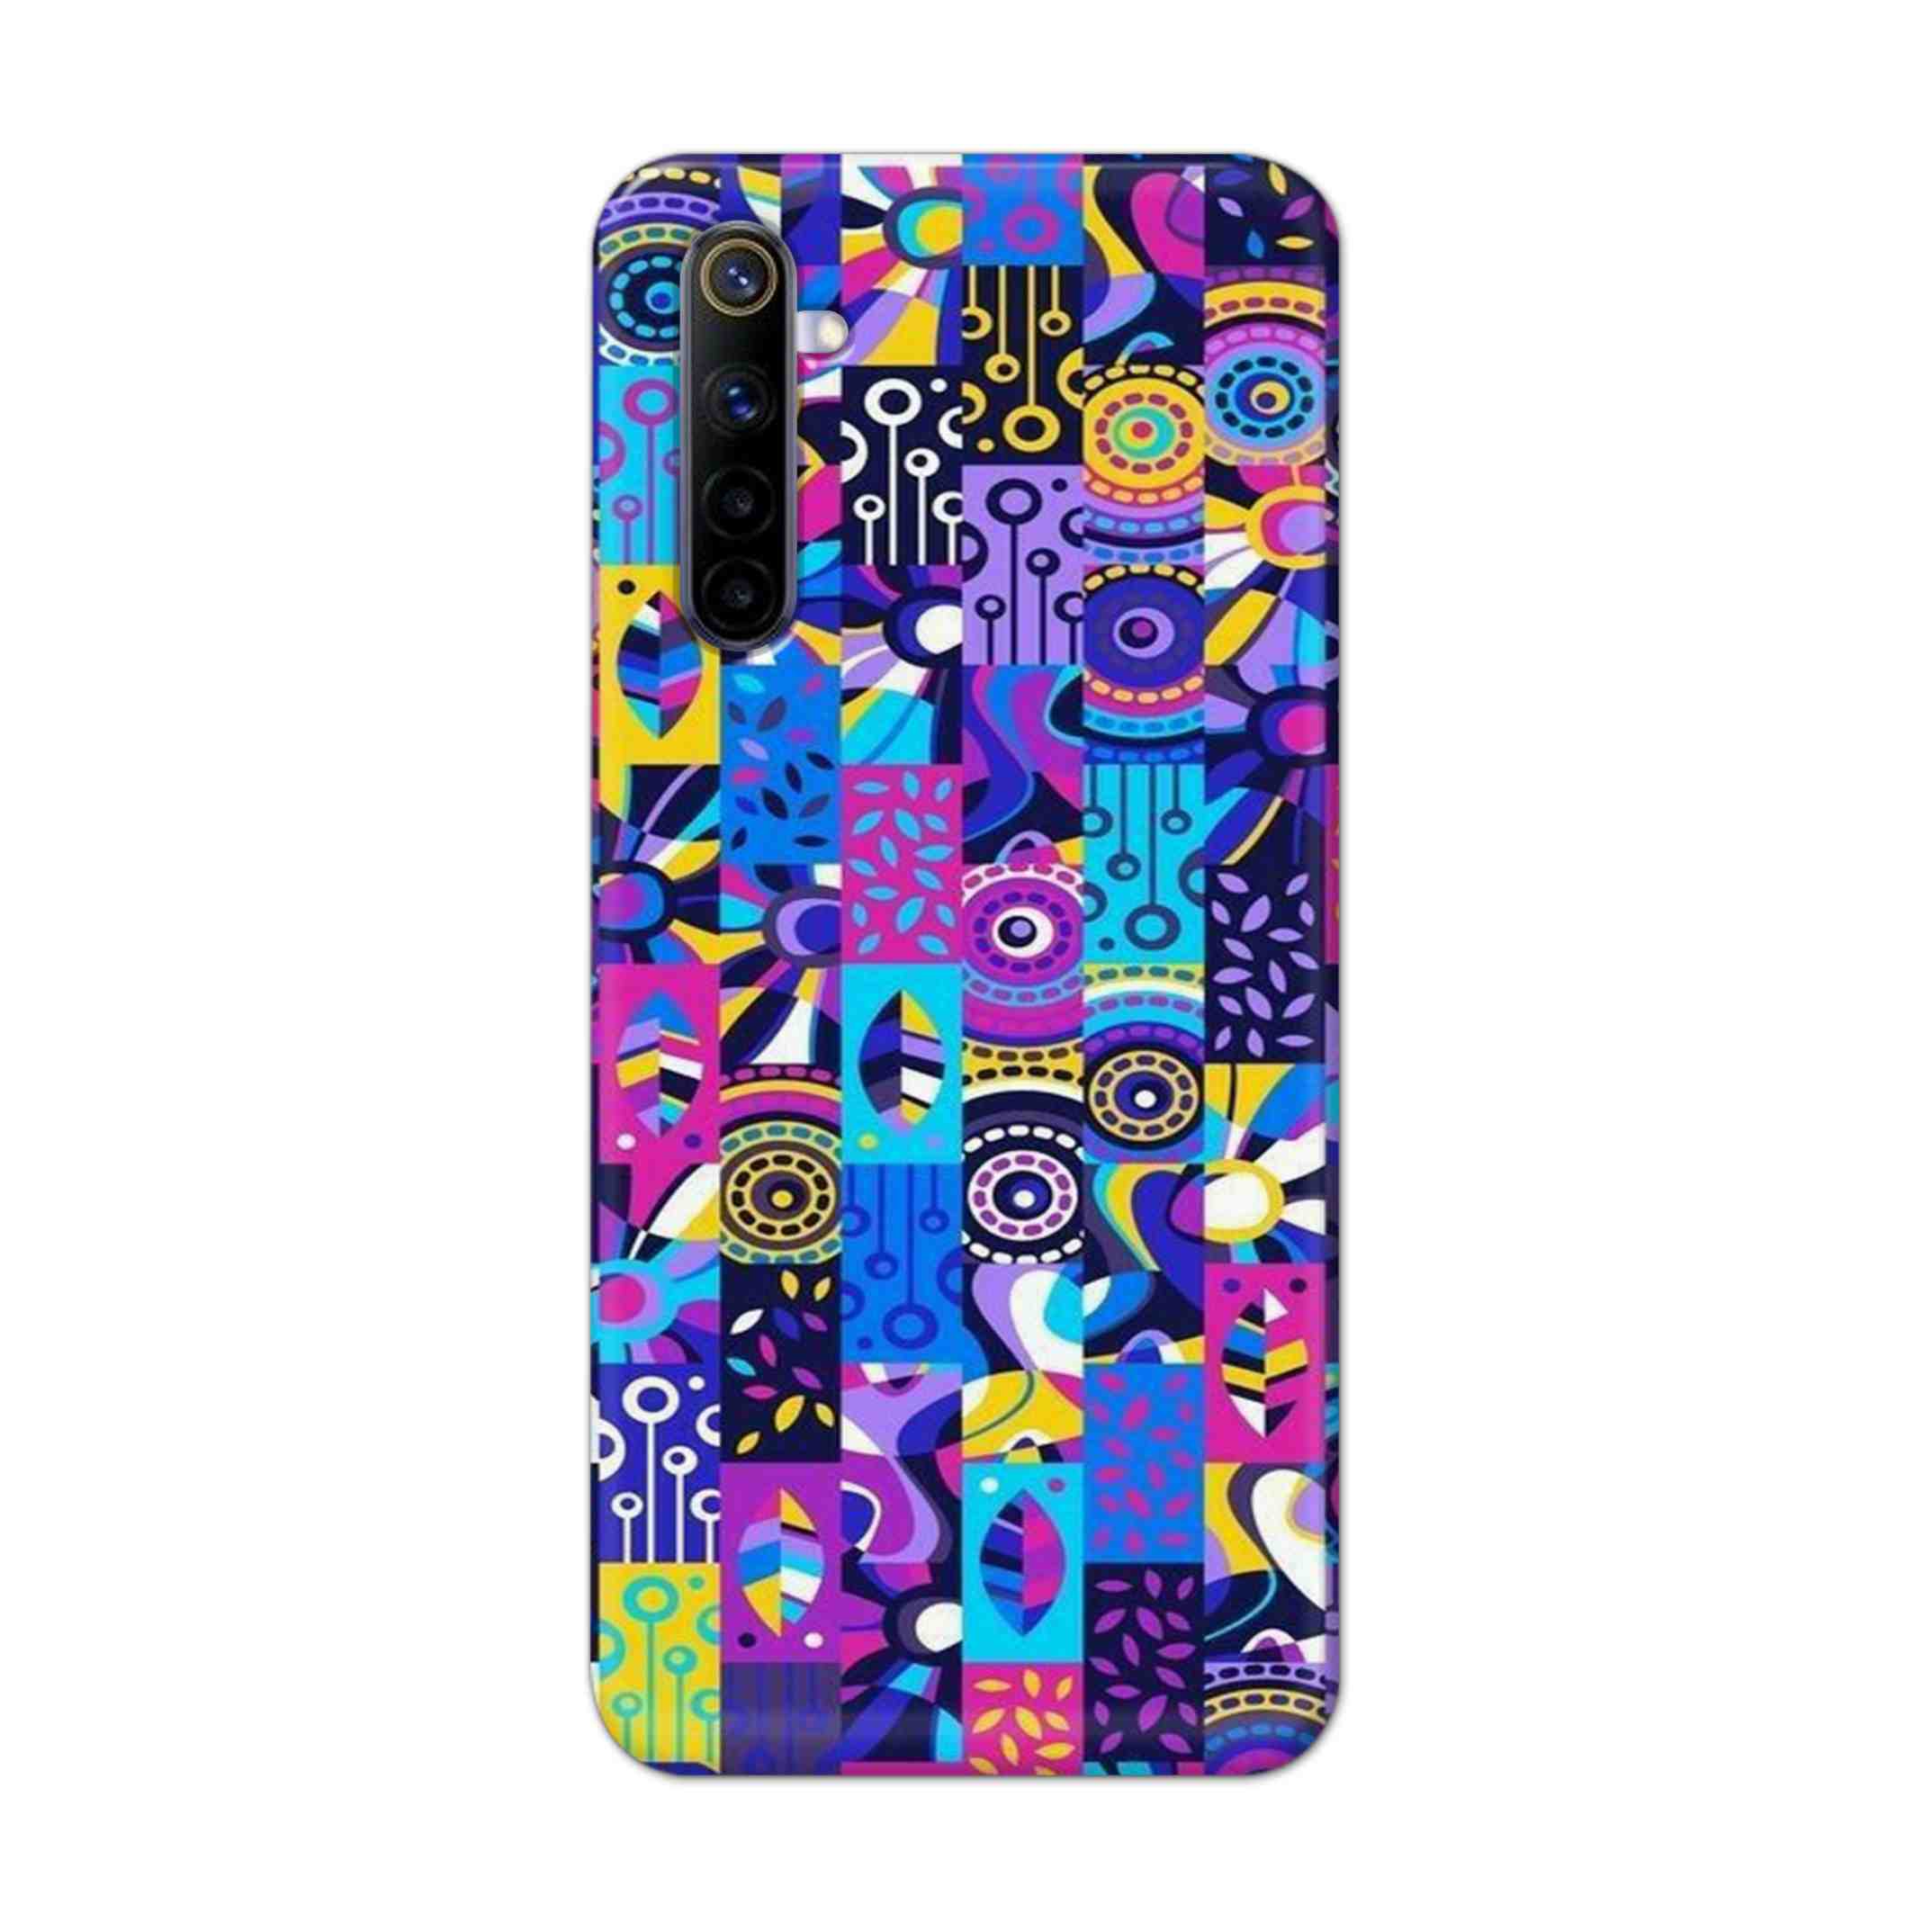 Buy Rainbow Art Hard Back Mobile Phone Case Cover For REALME 6 PRO Online